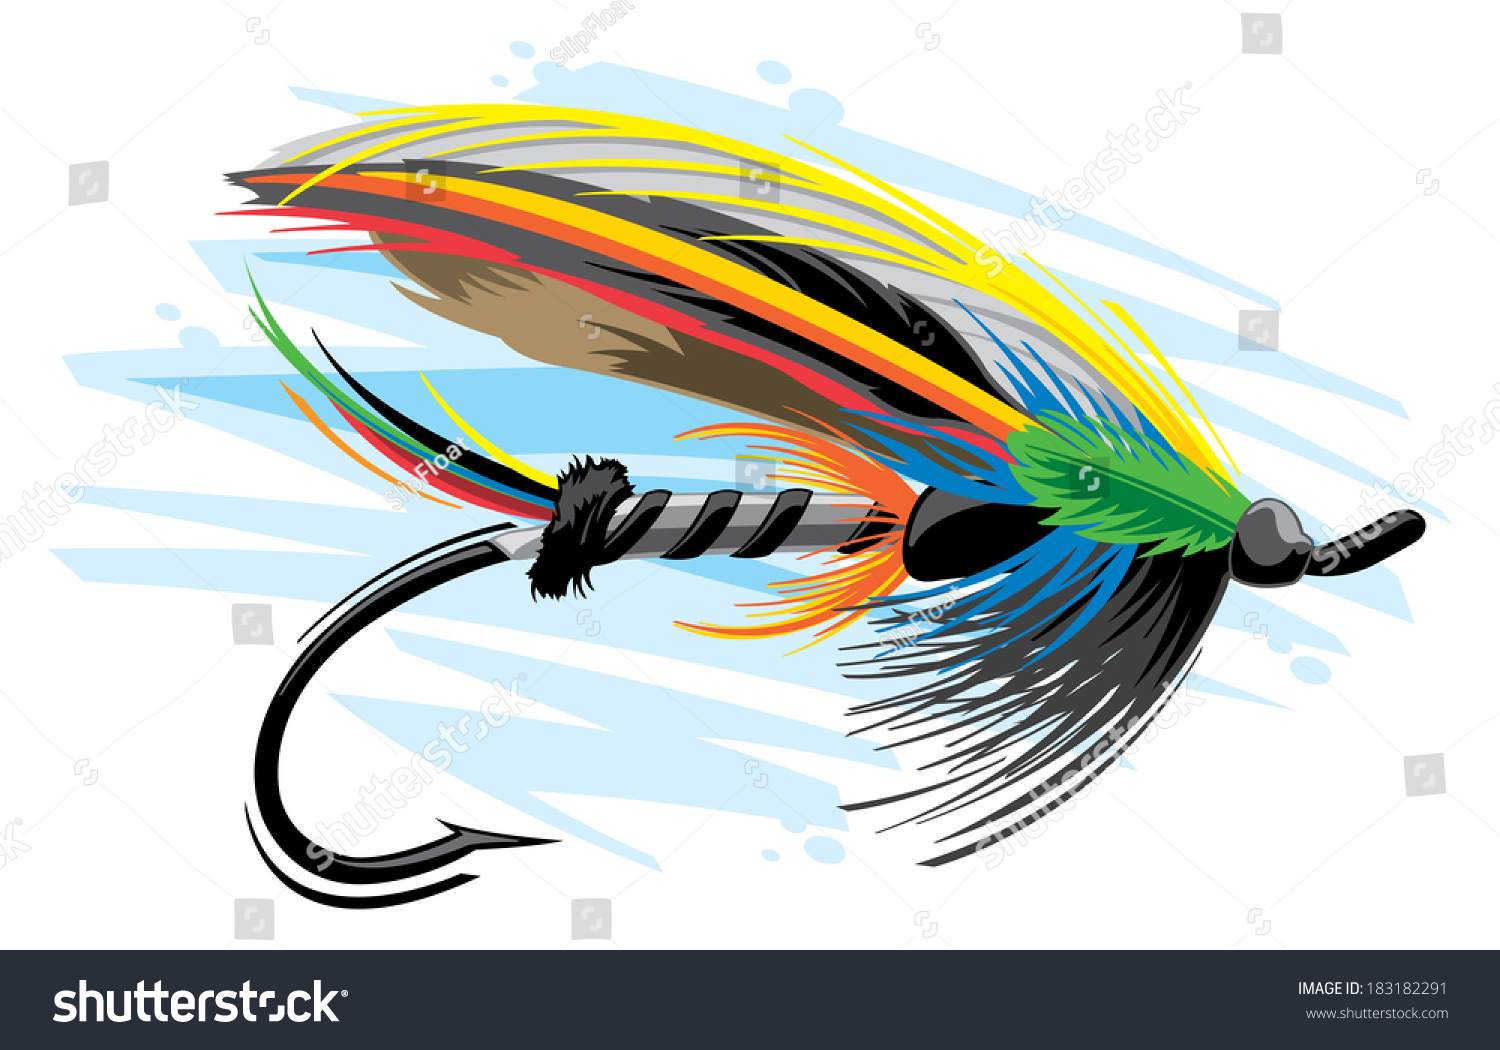 Fishing Lure Stock Vector (Royalty Free) 183182291 - Shutterstock